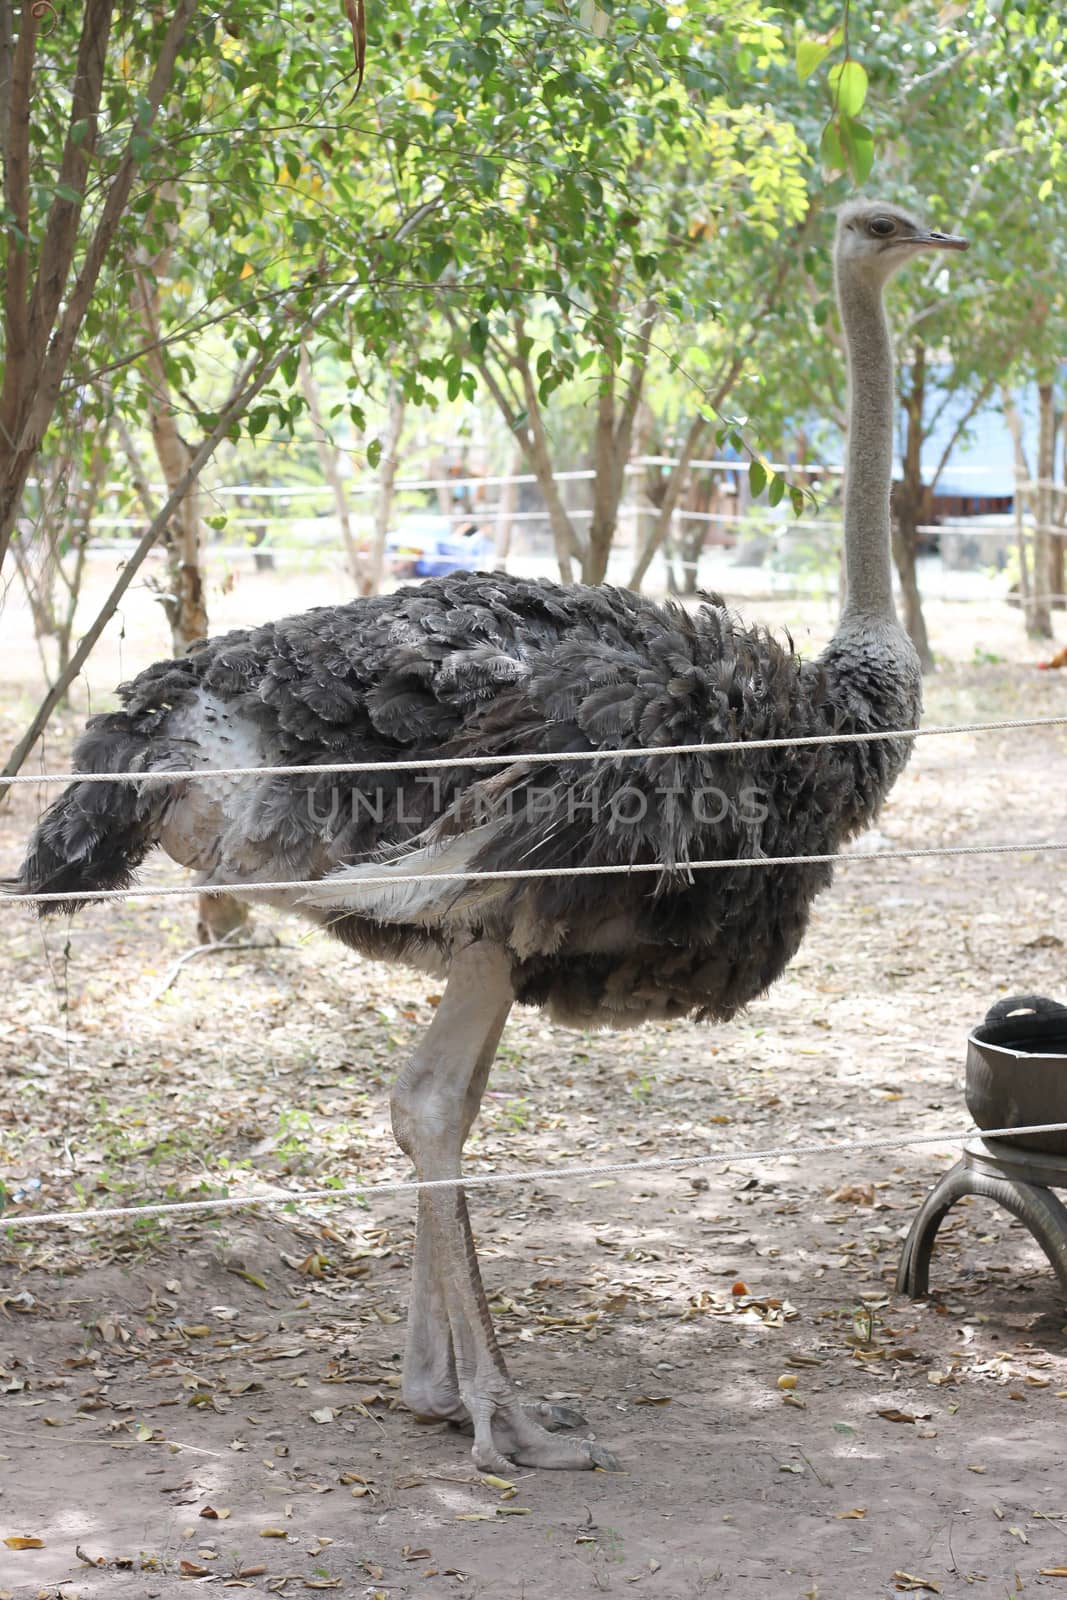 Ostrich in cage